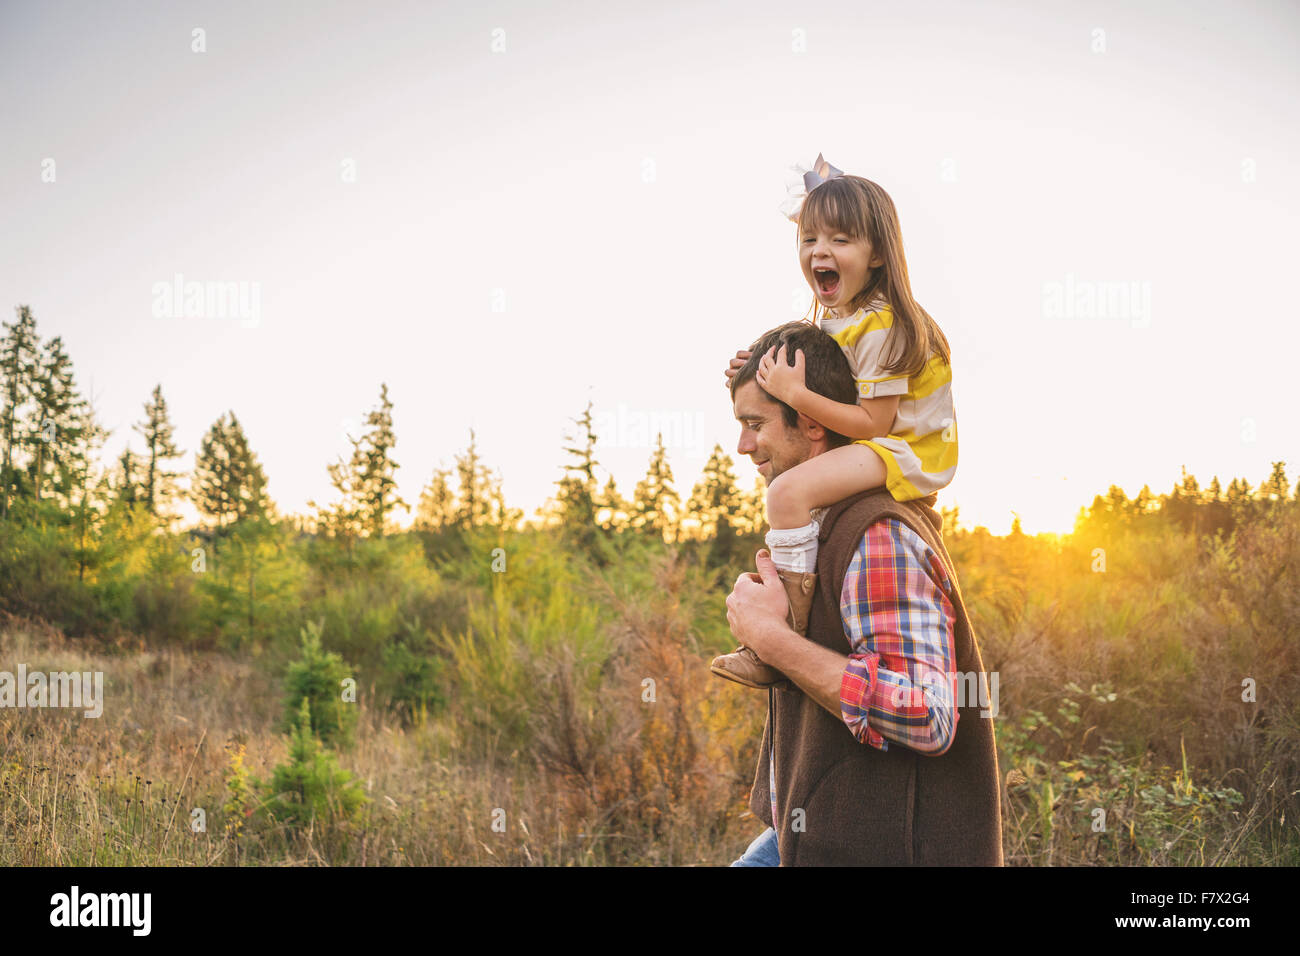 Father carrying daughter on his shoulders in the countryside Stock Photo